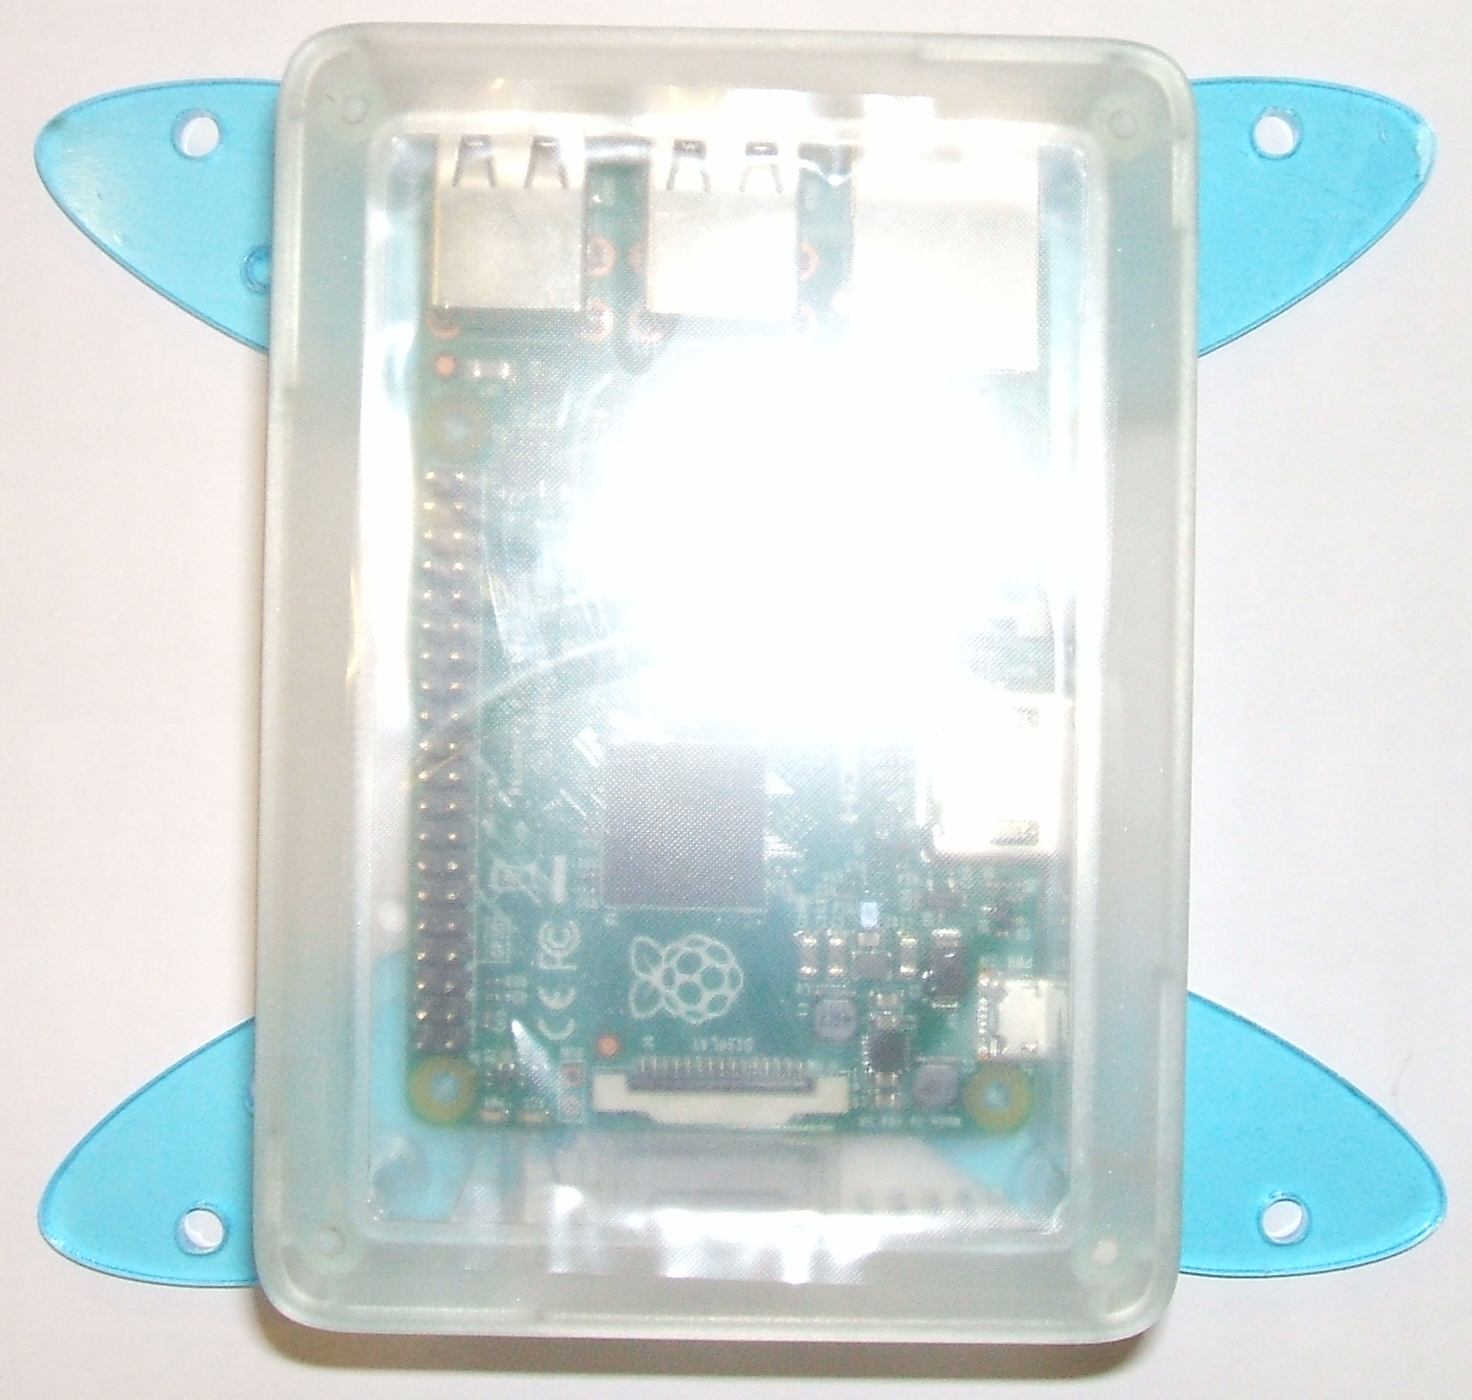 Image of VESA mounting Moulded Case/Enclosure for Model B Raspberry Pi 2, 3 and Pi 1 B+ (Clear)